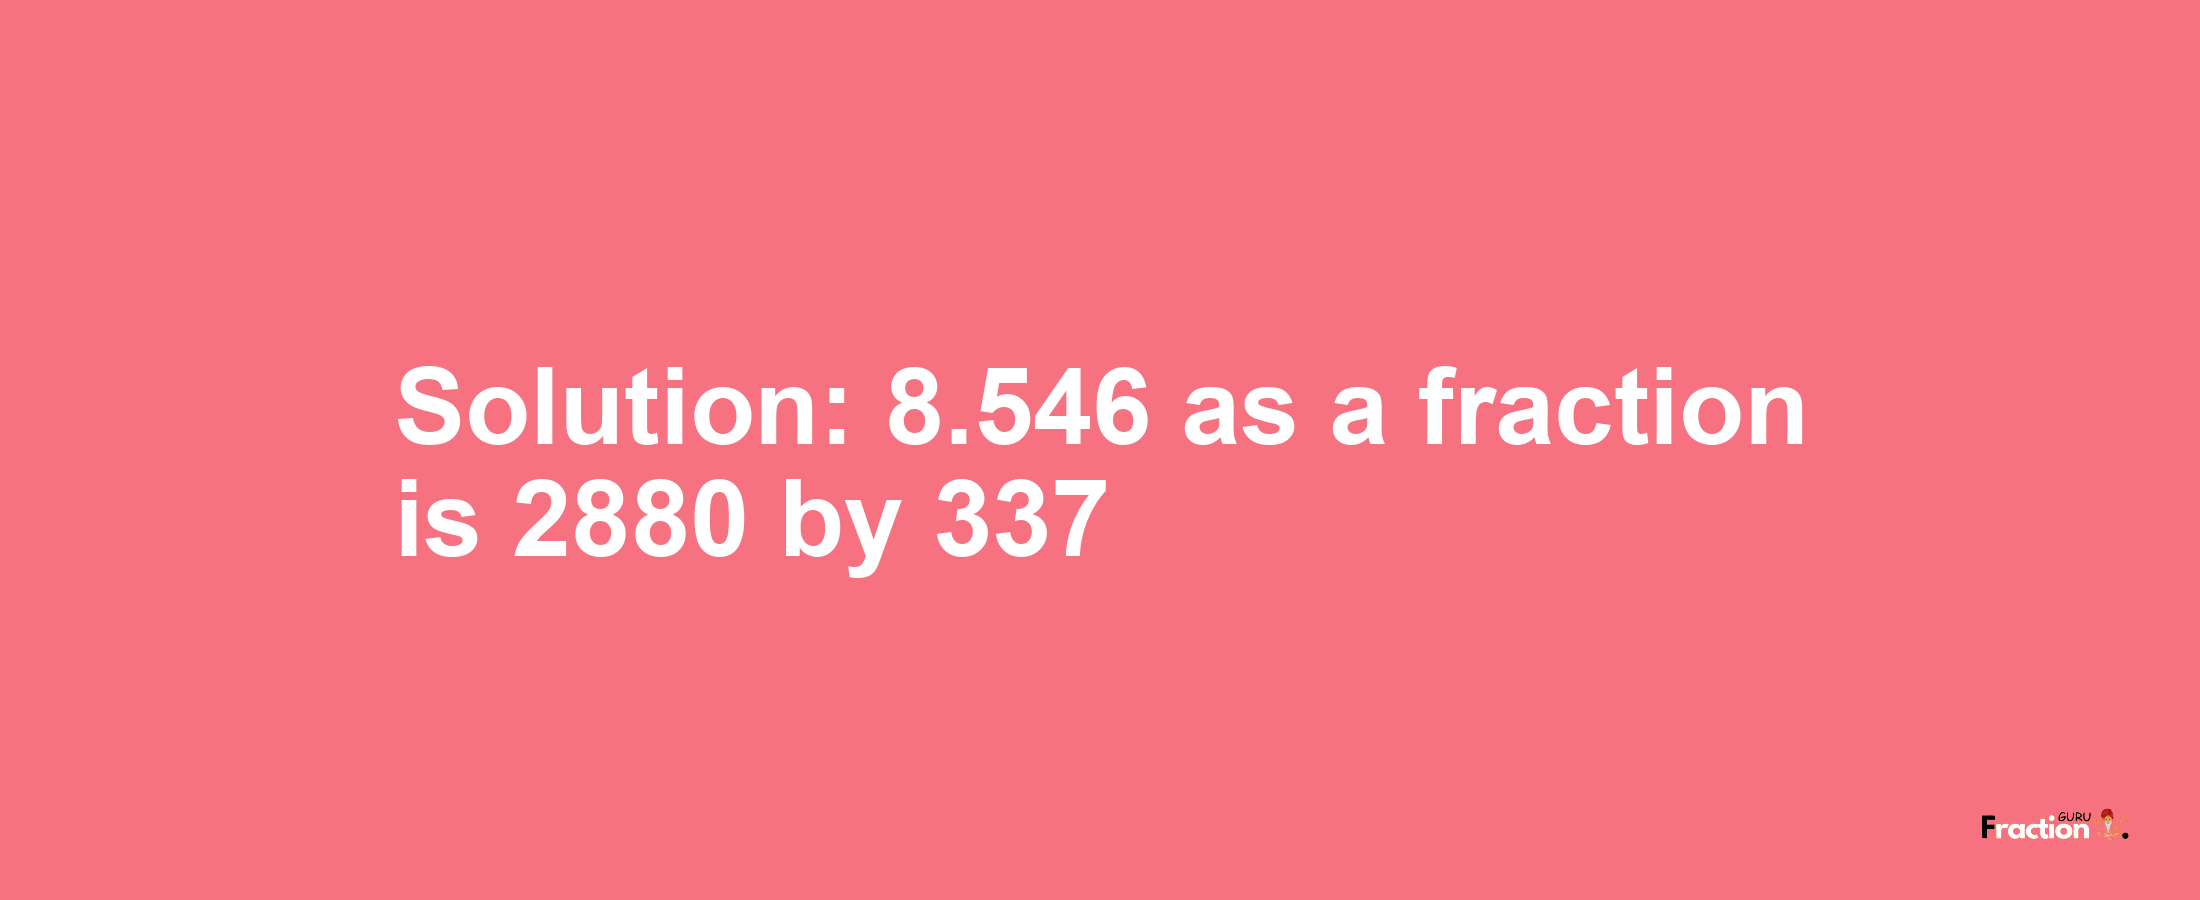 Solution:8.546 as a fraction is 2880/337